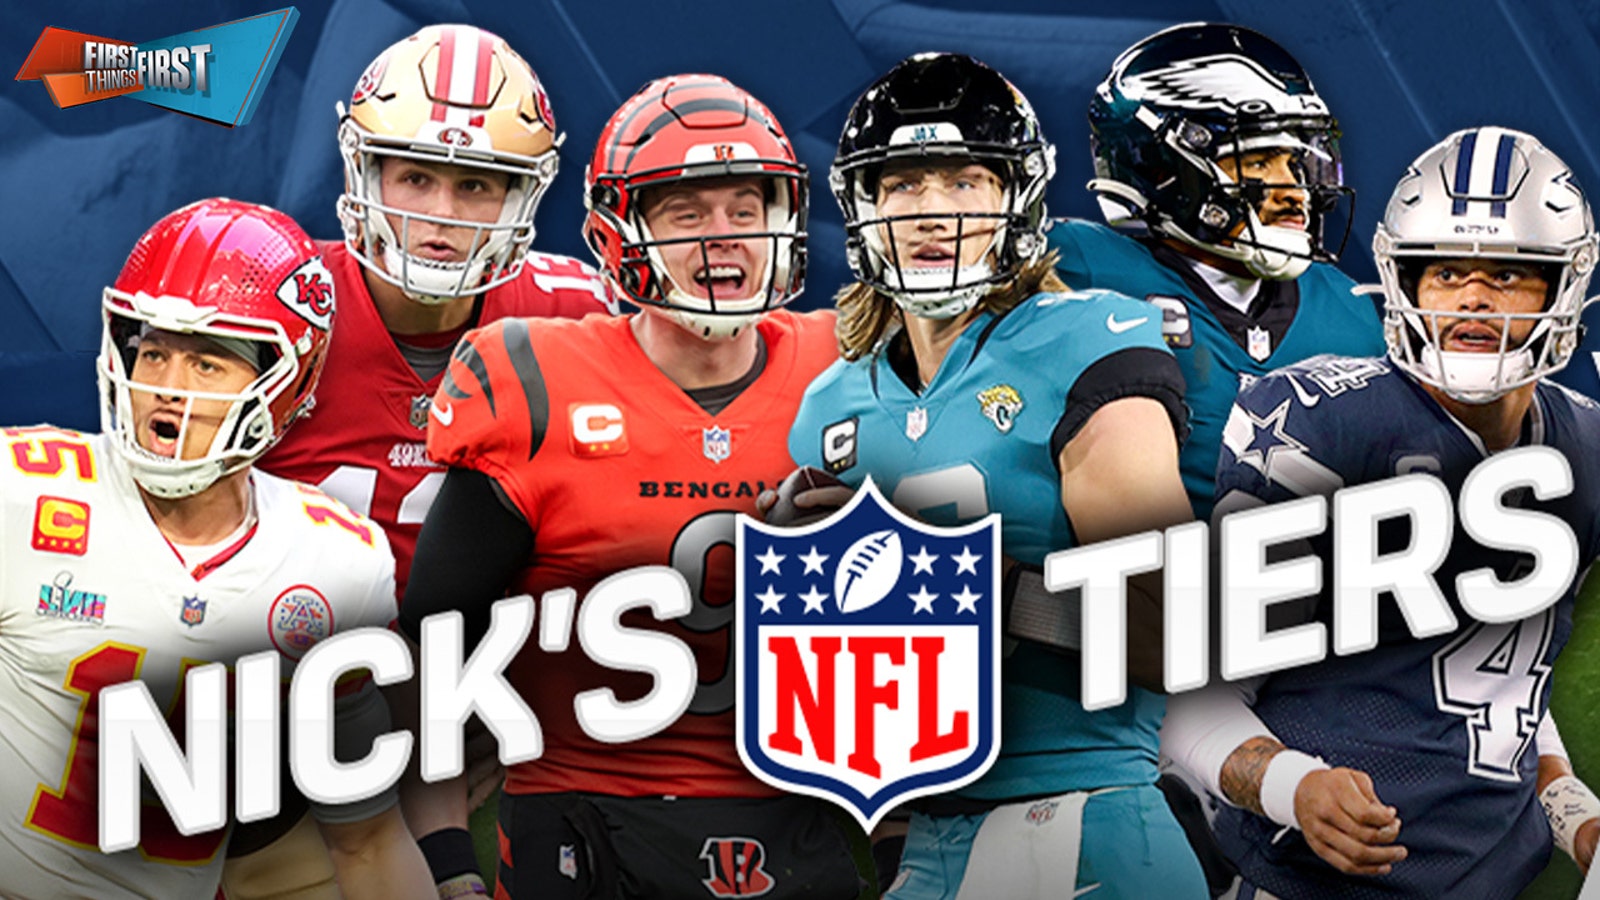 Nick's early NFL Tiers